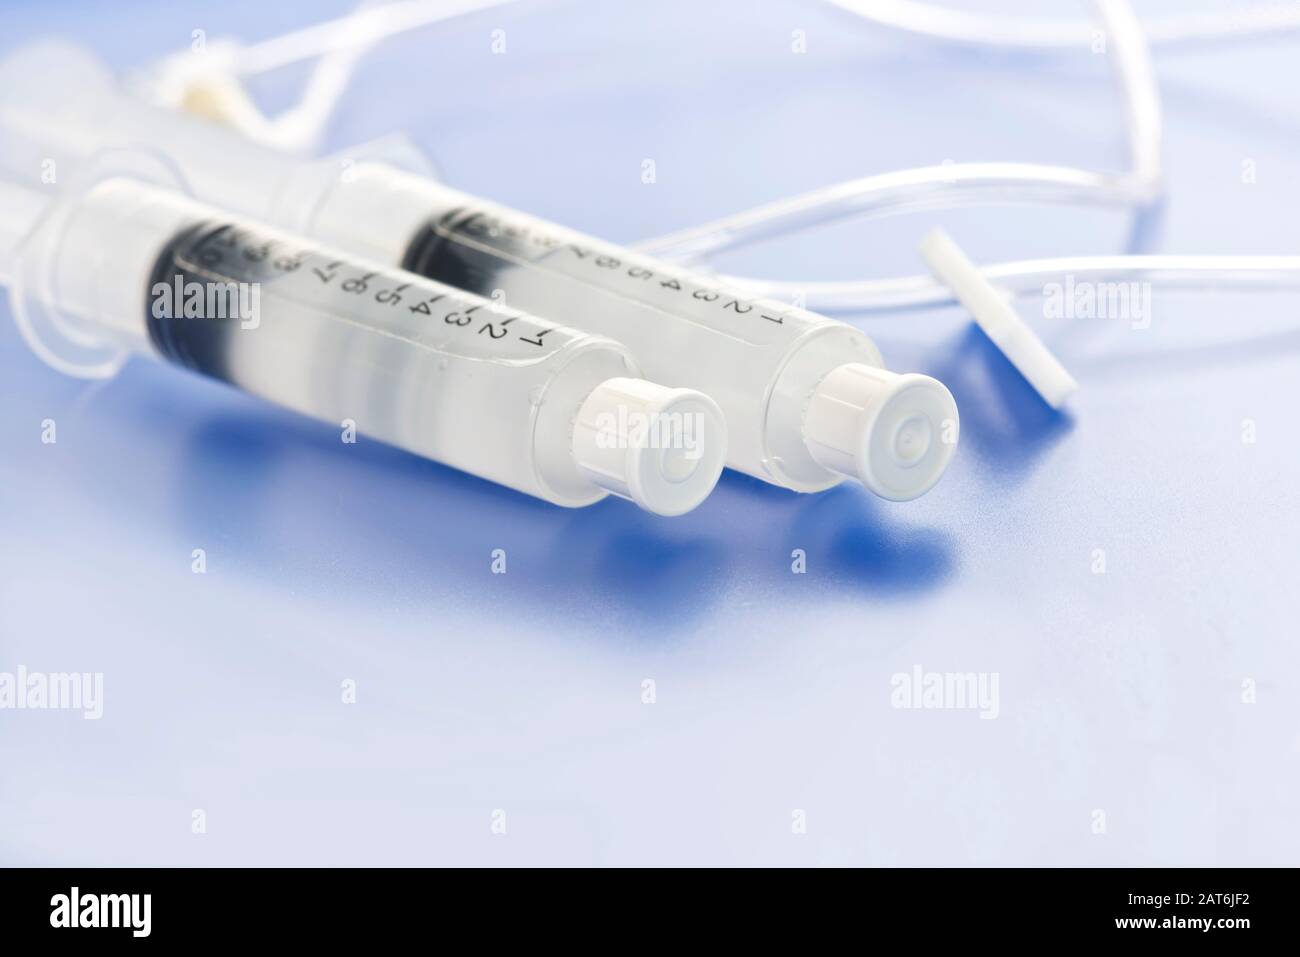 Sterile saline flush injection vials with IV tubing on blue tray. Stock Photo